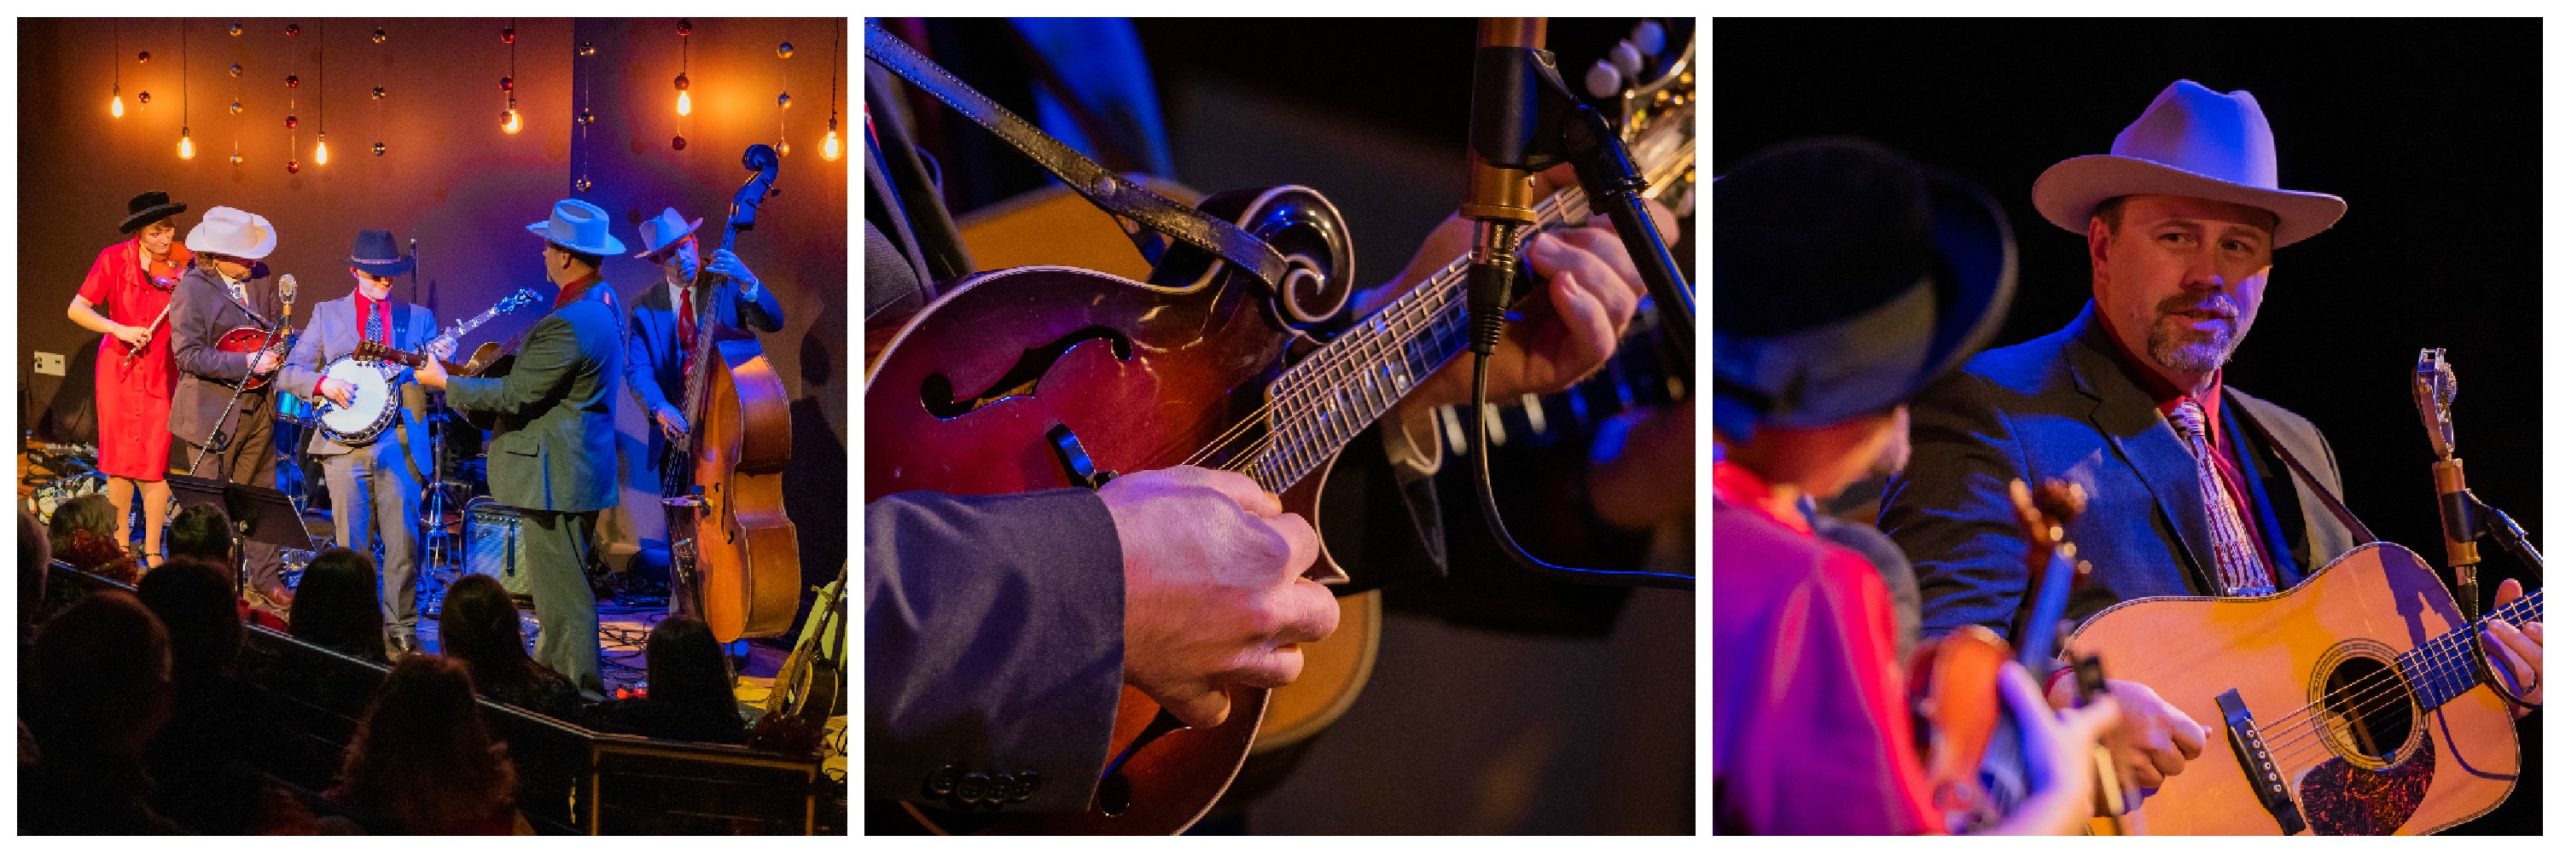 Left pic: The full band of Carolina Blue on stage at Farm and Fun Time; center pic: A close up of the mandolin as it was being played; right pic: The lead guitarist and fiddler of Carolina Blue.